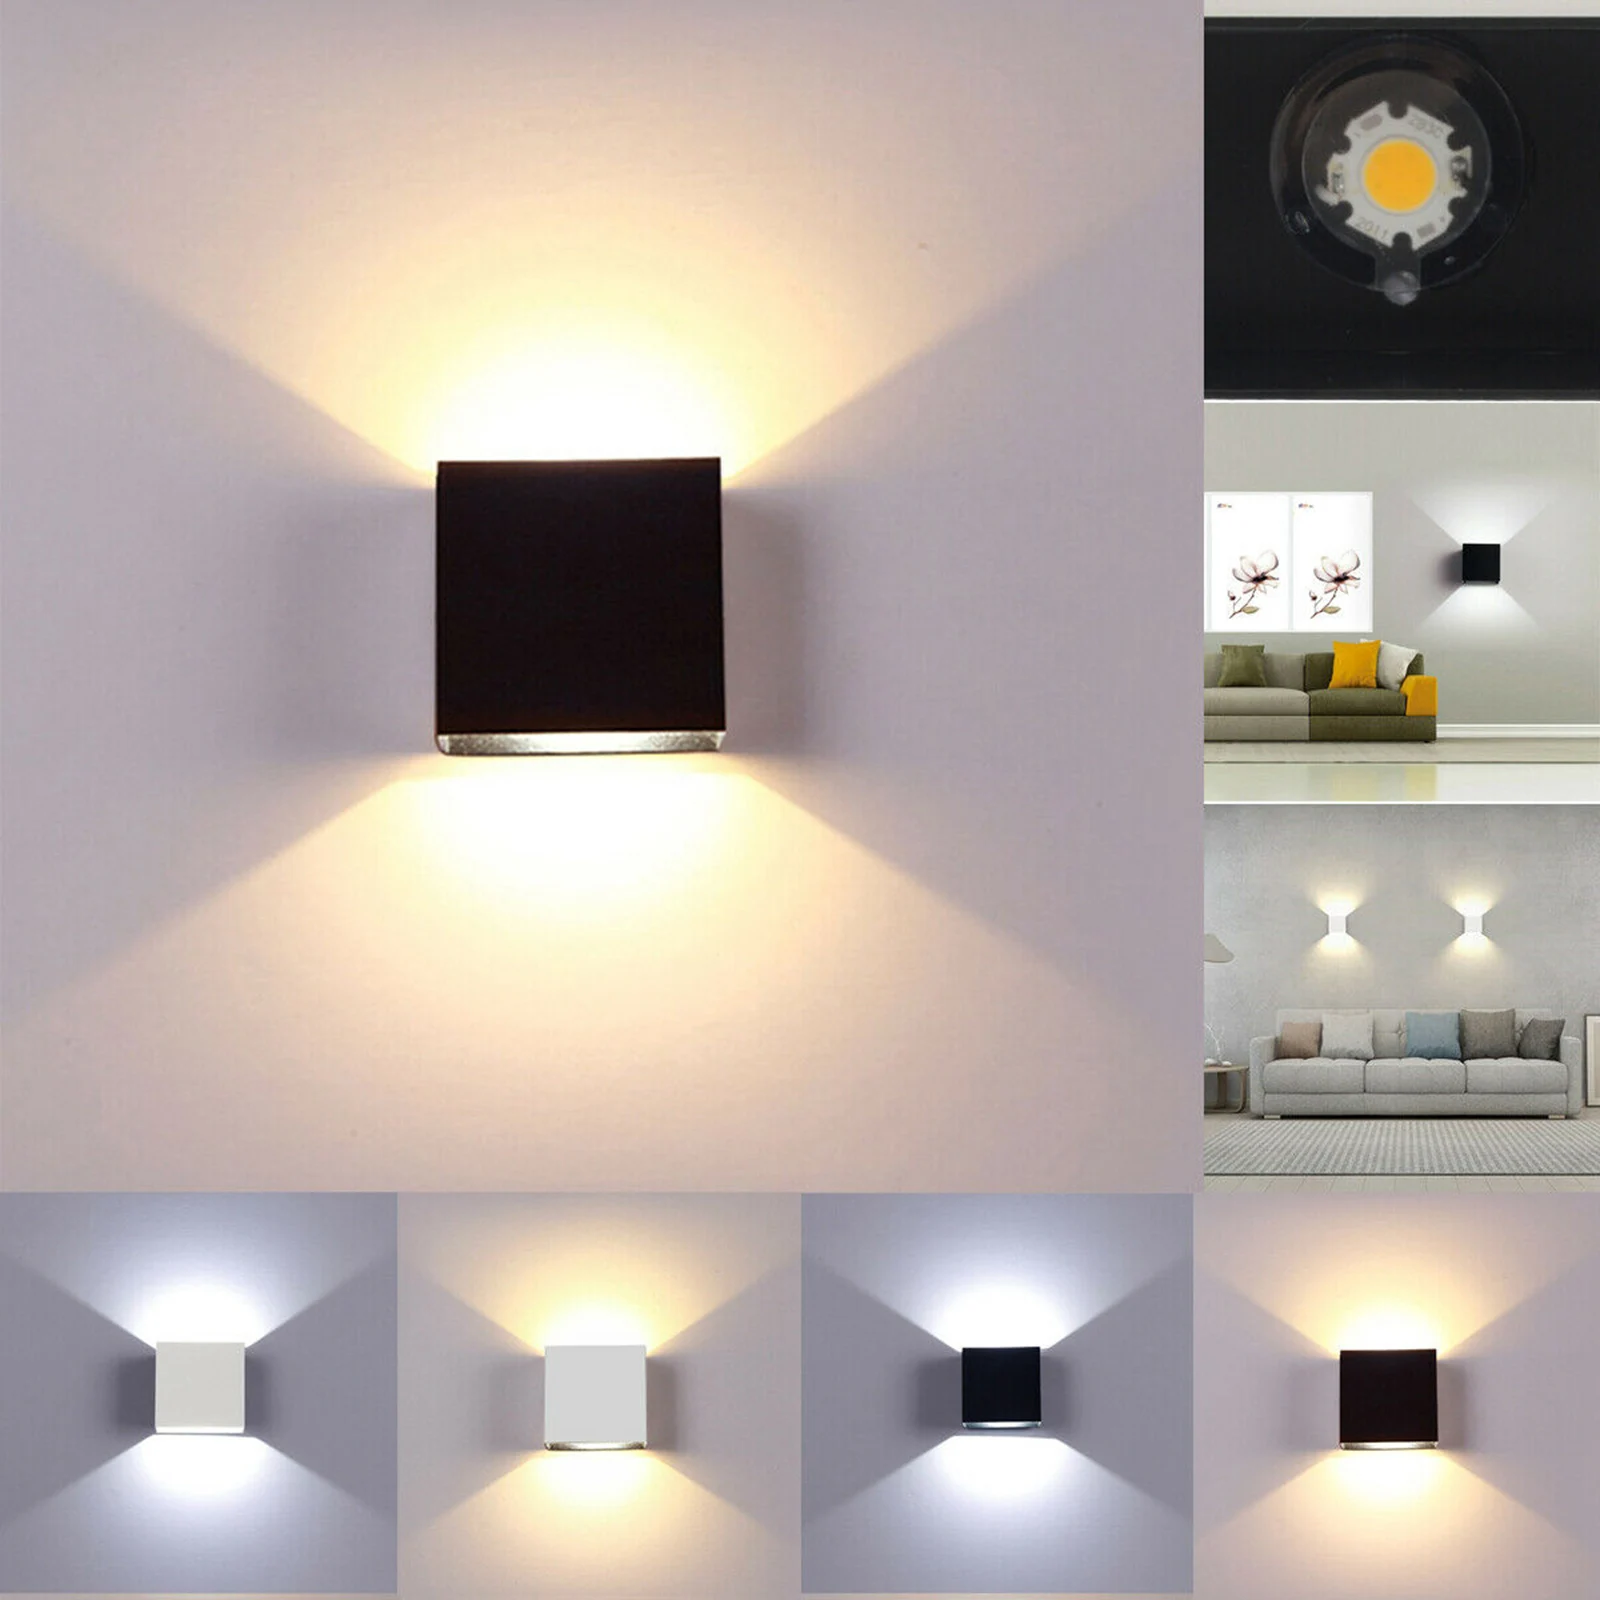 6w Led Wall Lamp Modern Up Down Sconce Lighting Fixture Light Indoor Decoration Bedroom Decoration wall mounted lights